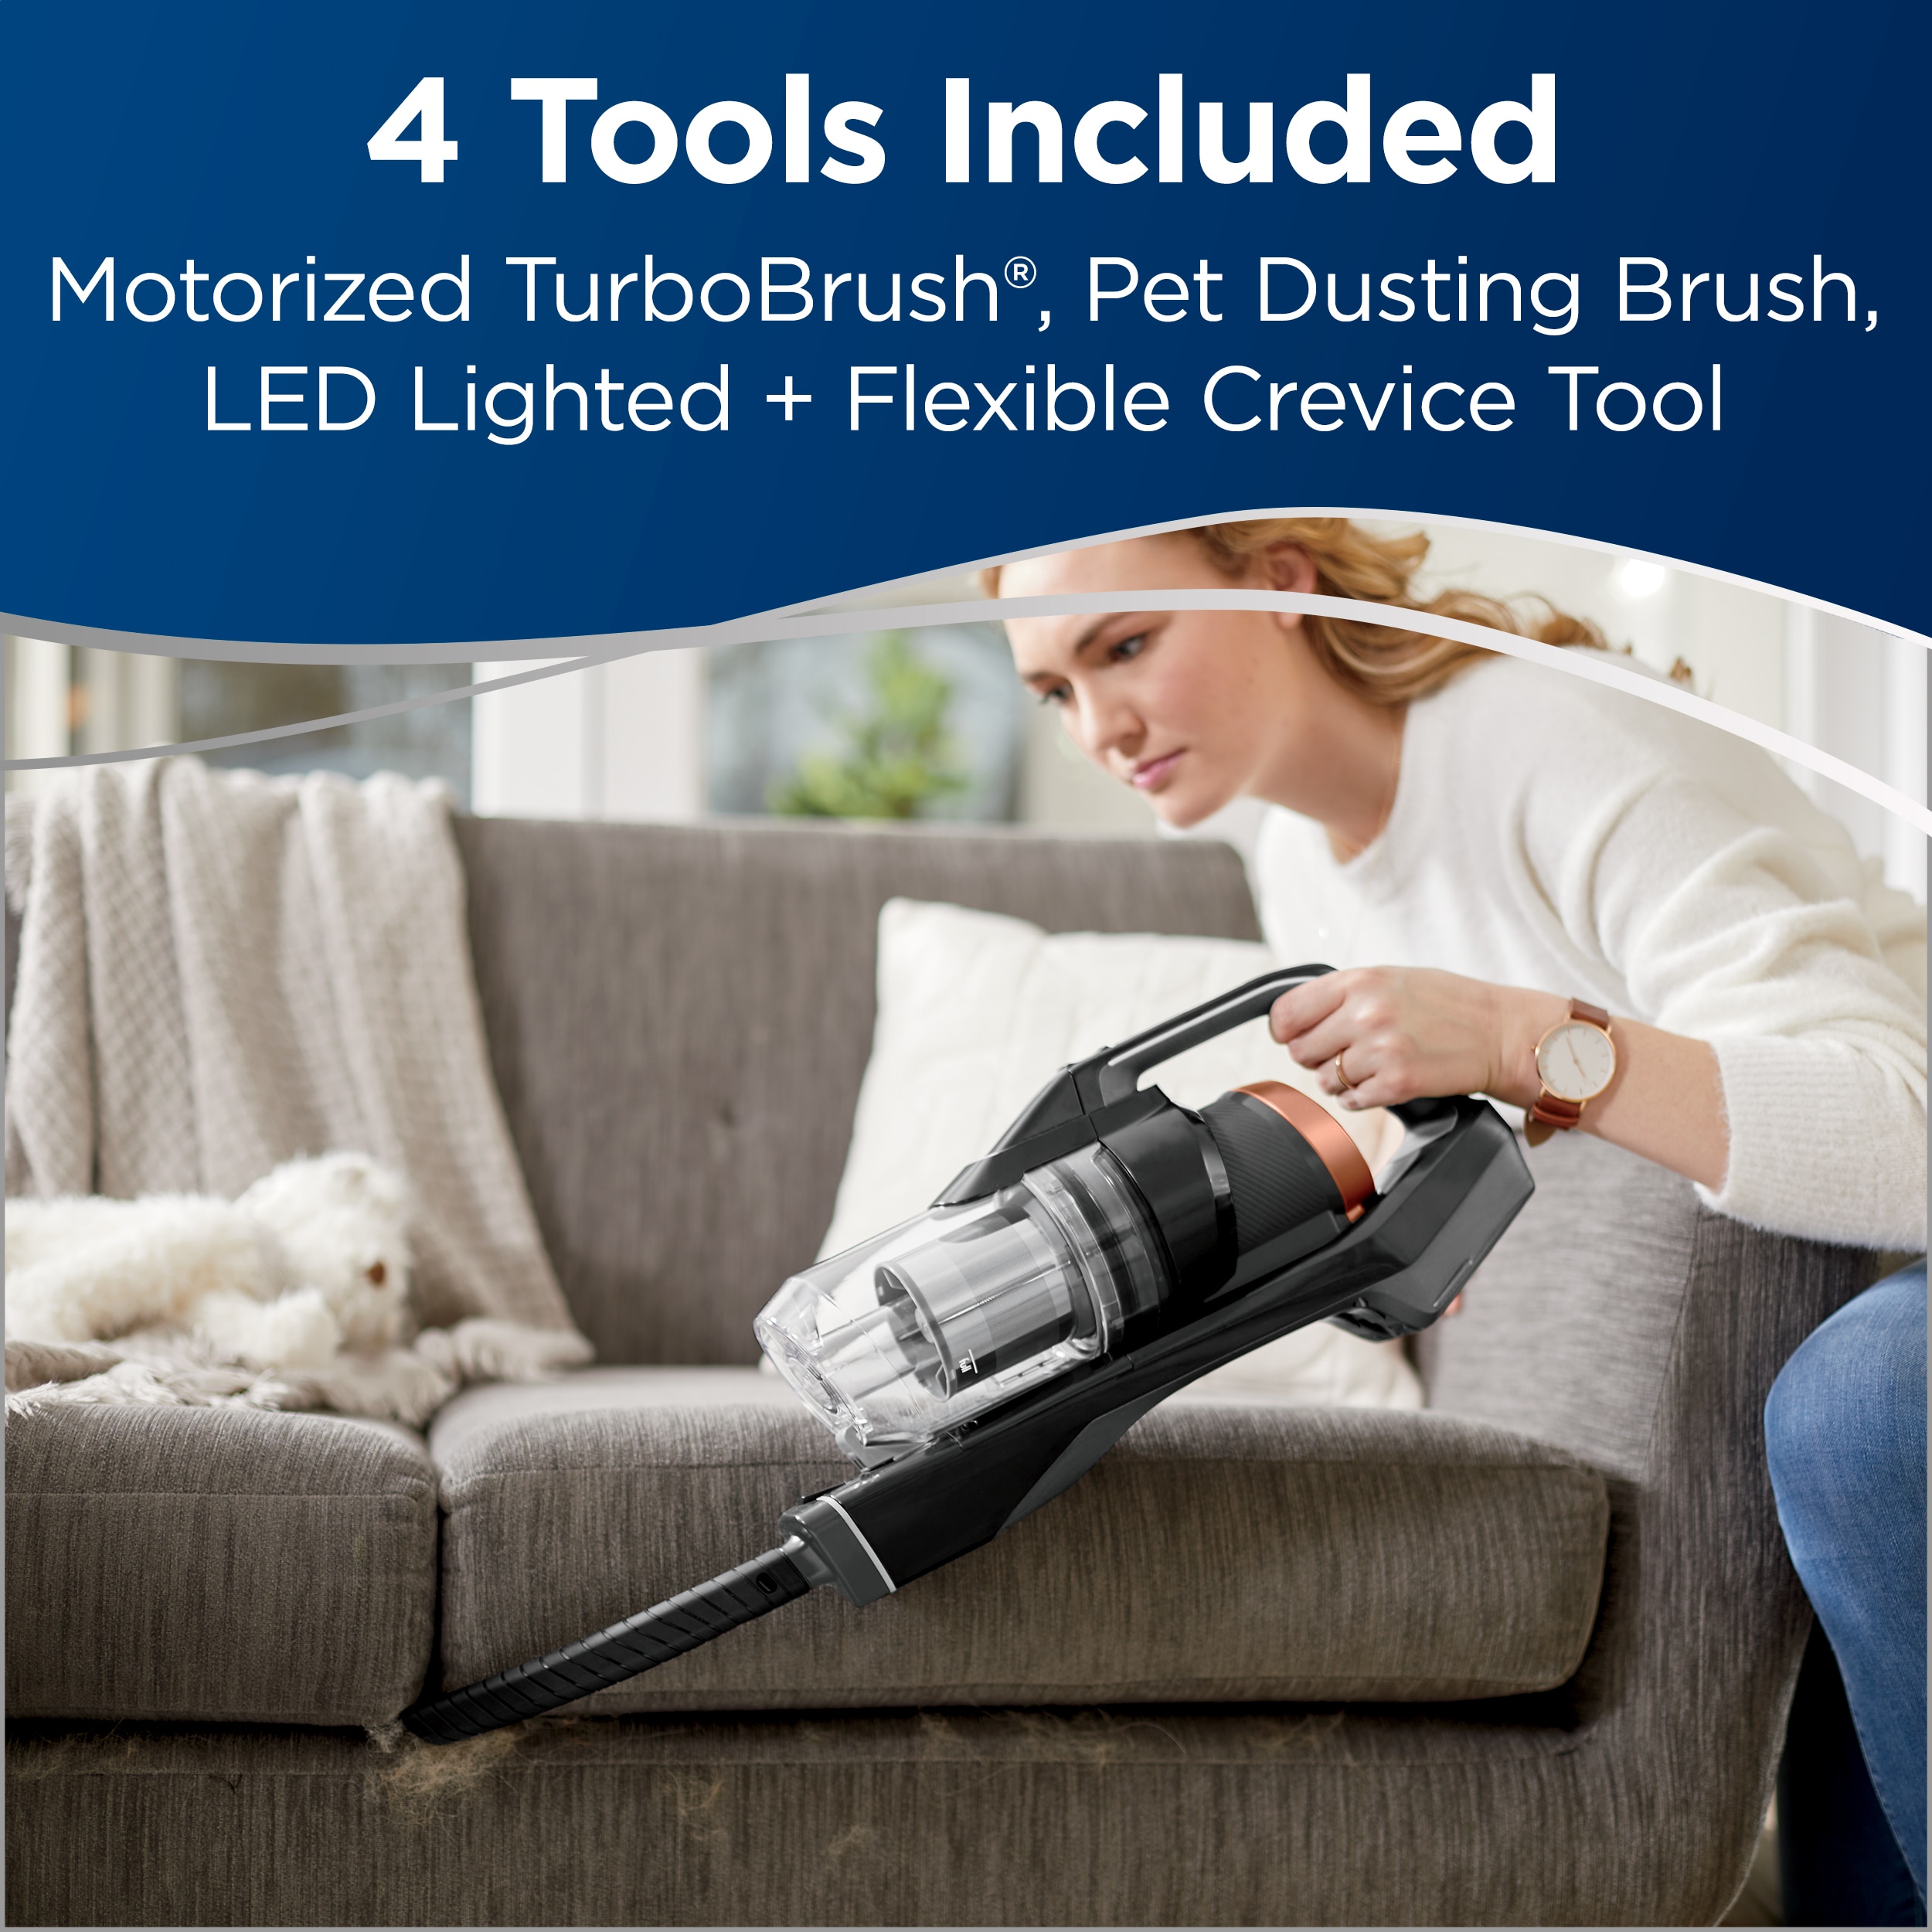 Bissell Flexible Crevice Tool fits ICONpet Cordless Vacuum Cleaner, 1620766  - Seneca River Trading, Inc.